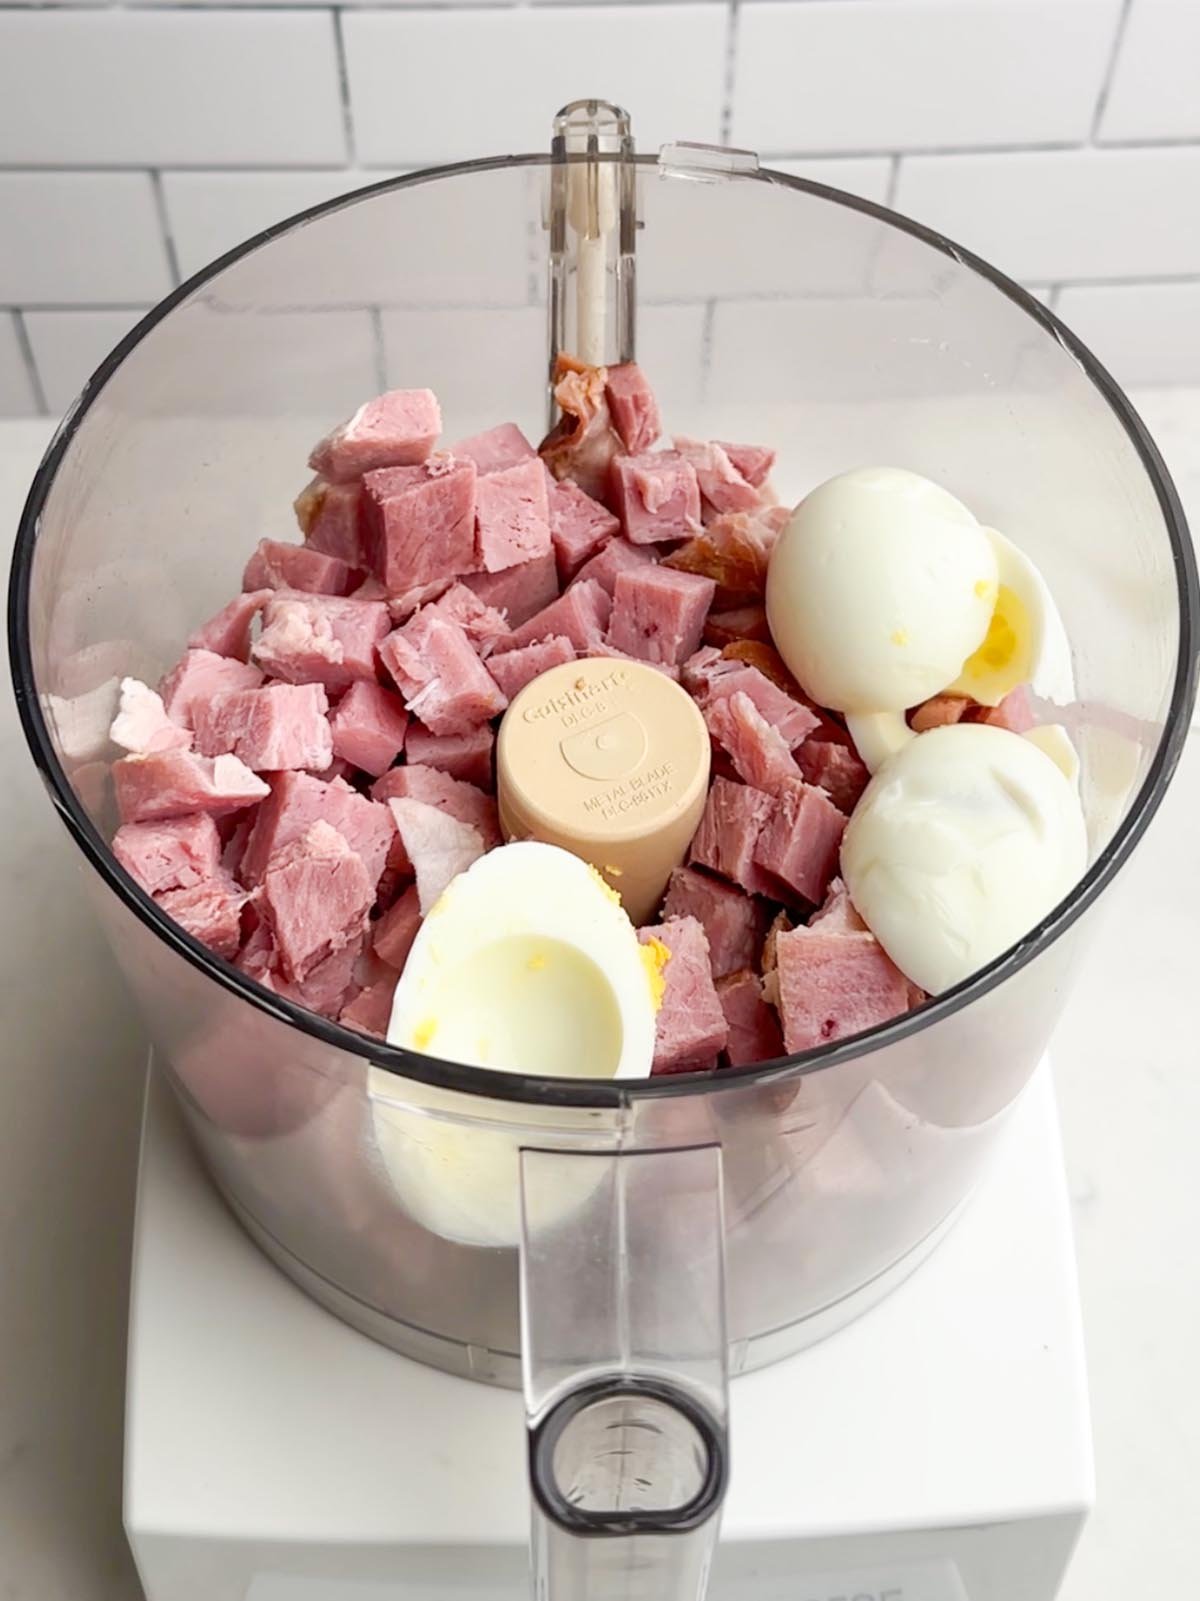 cubed ham and egg whites in a food processor